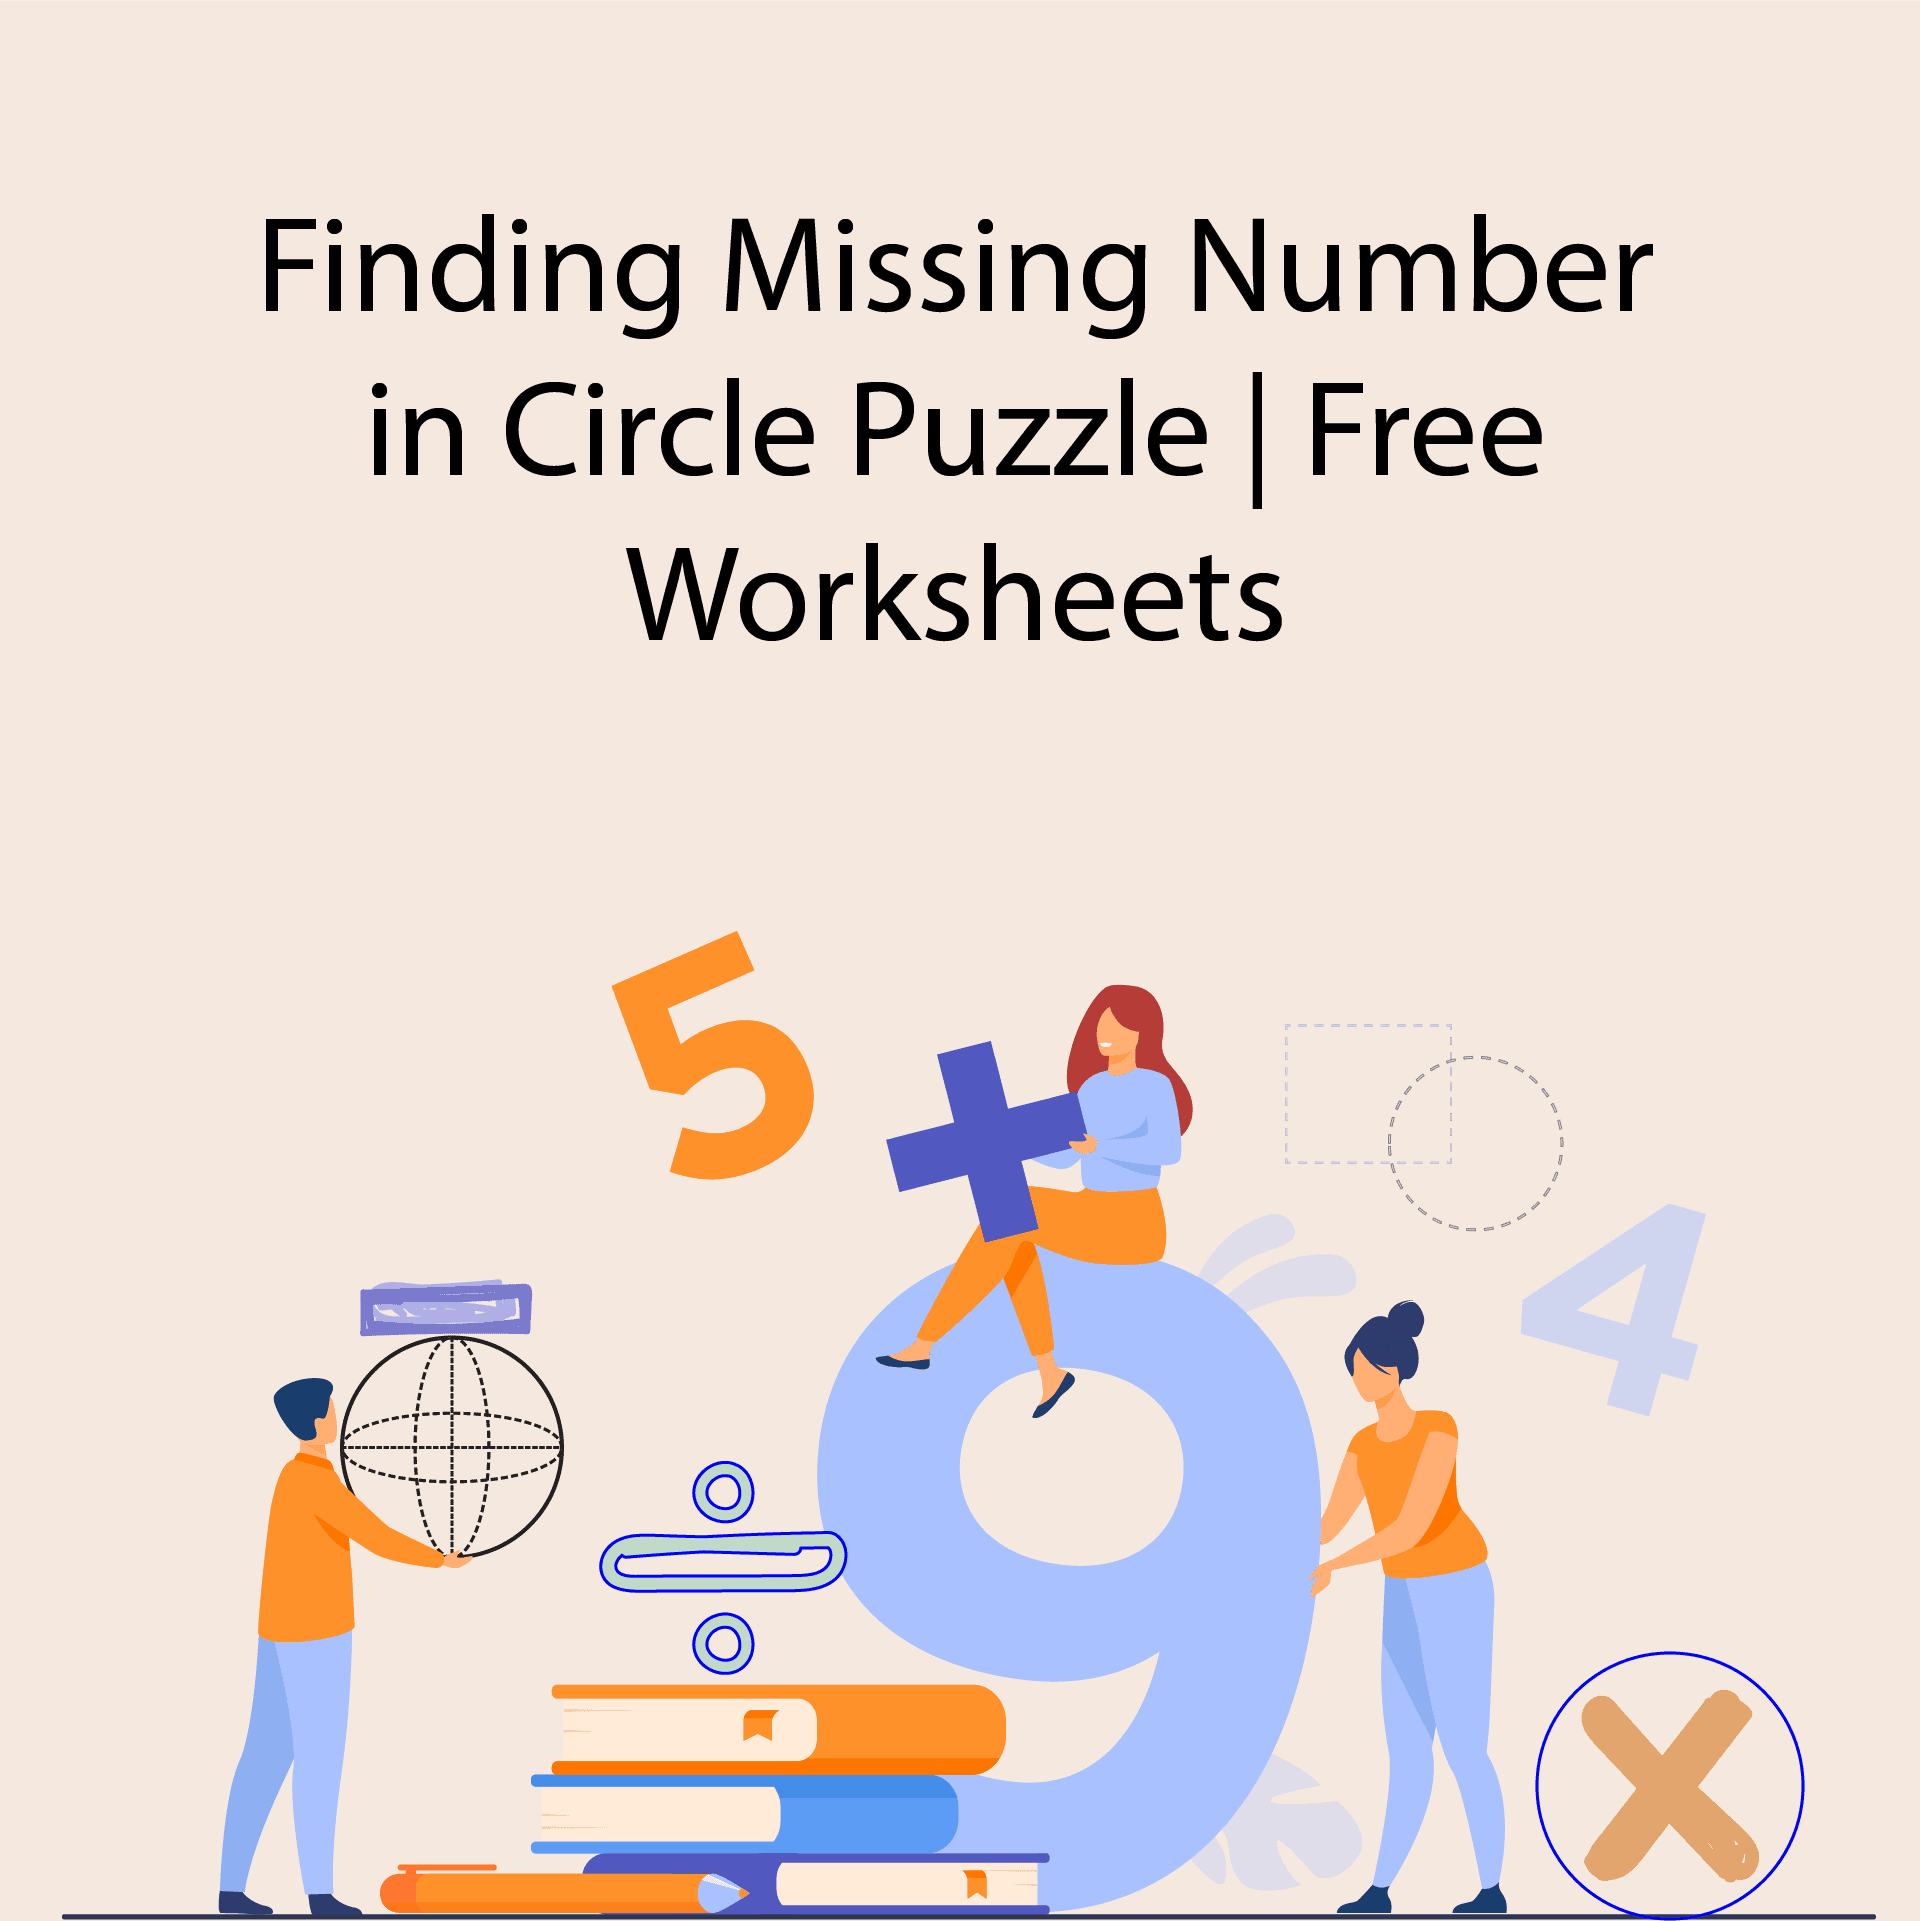 5 Free Finding Missing Number in Circle Puzzle Worksheets